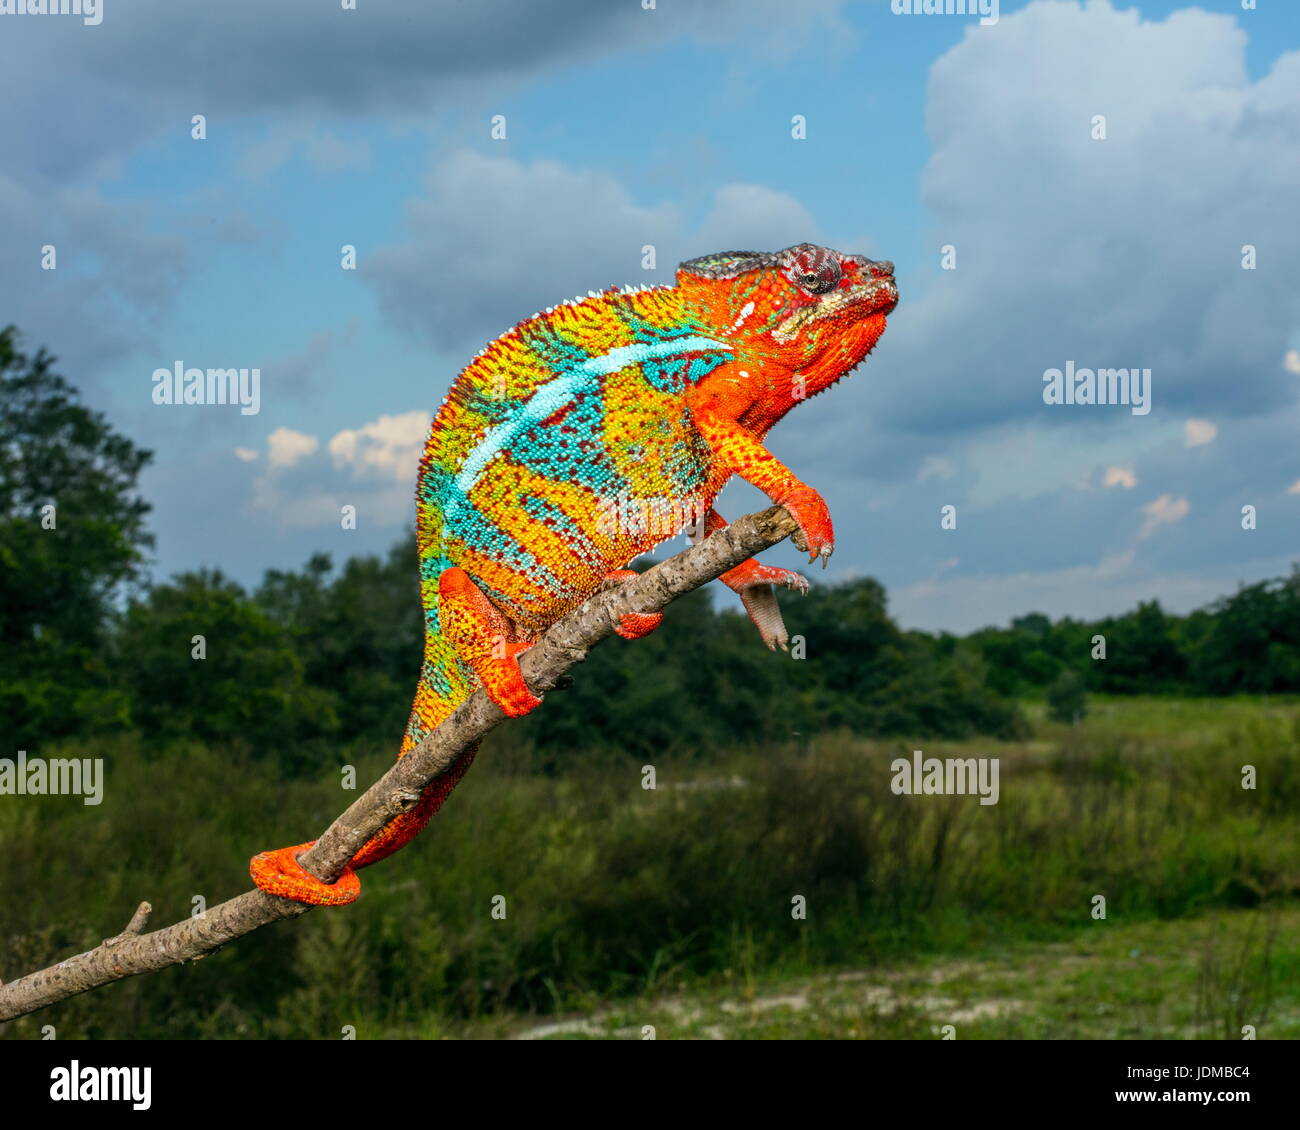 A panther chameleon, Furcifer pardalis, rests on a tree branch. Stock Photo